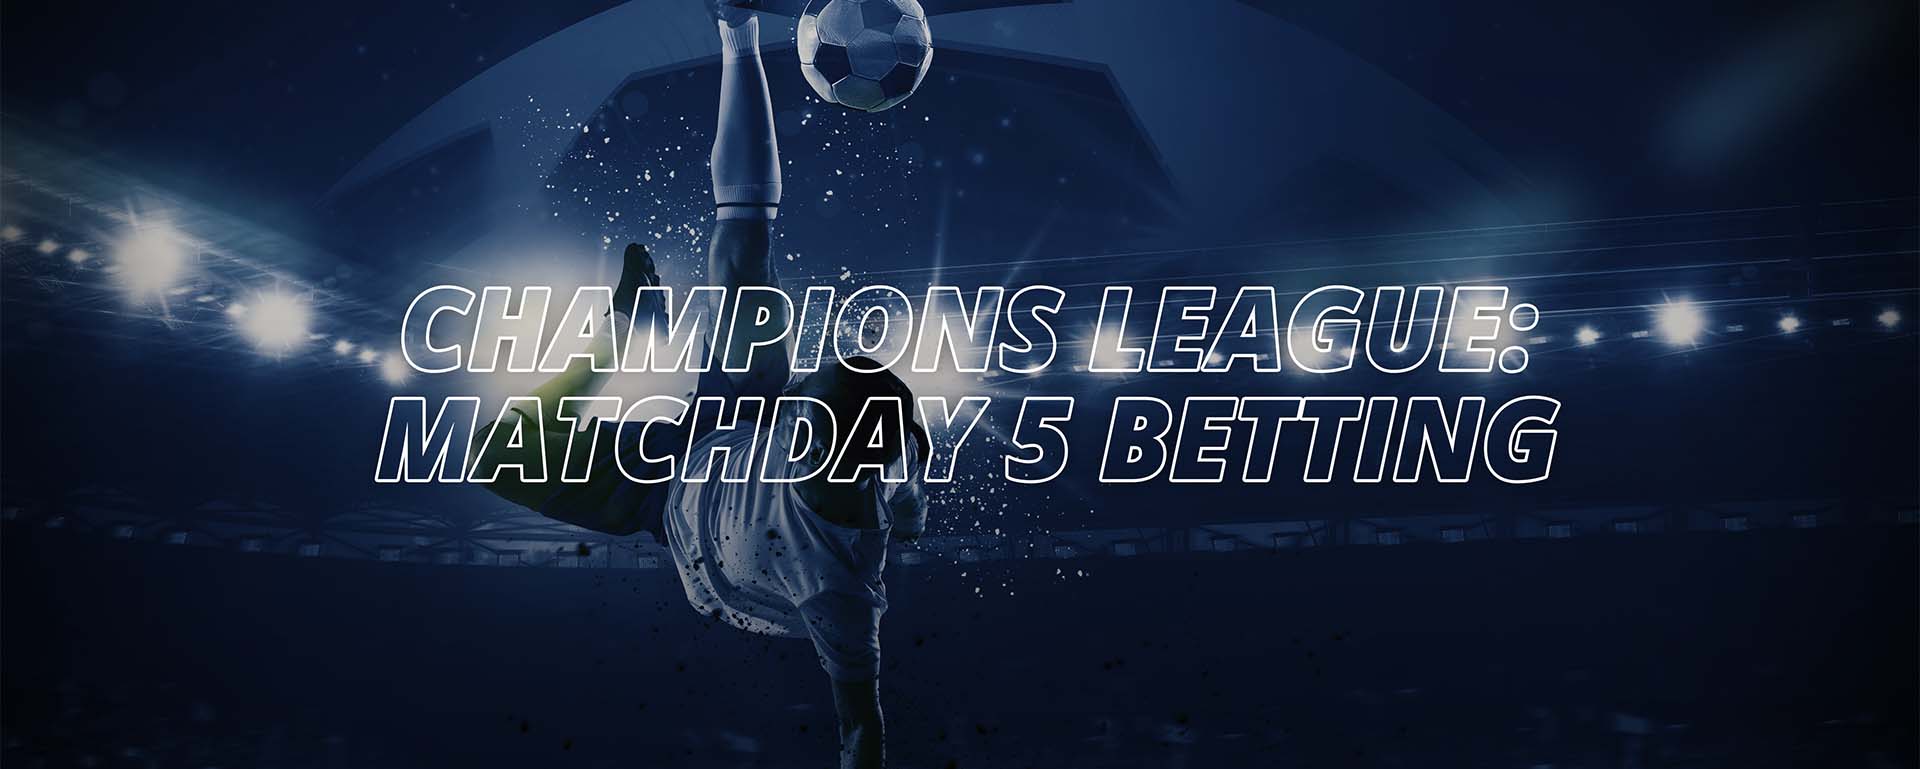 CHAMPIONS LEAGUE: MATCHDAY 5 BETTING TIPS